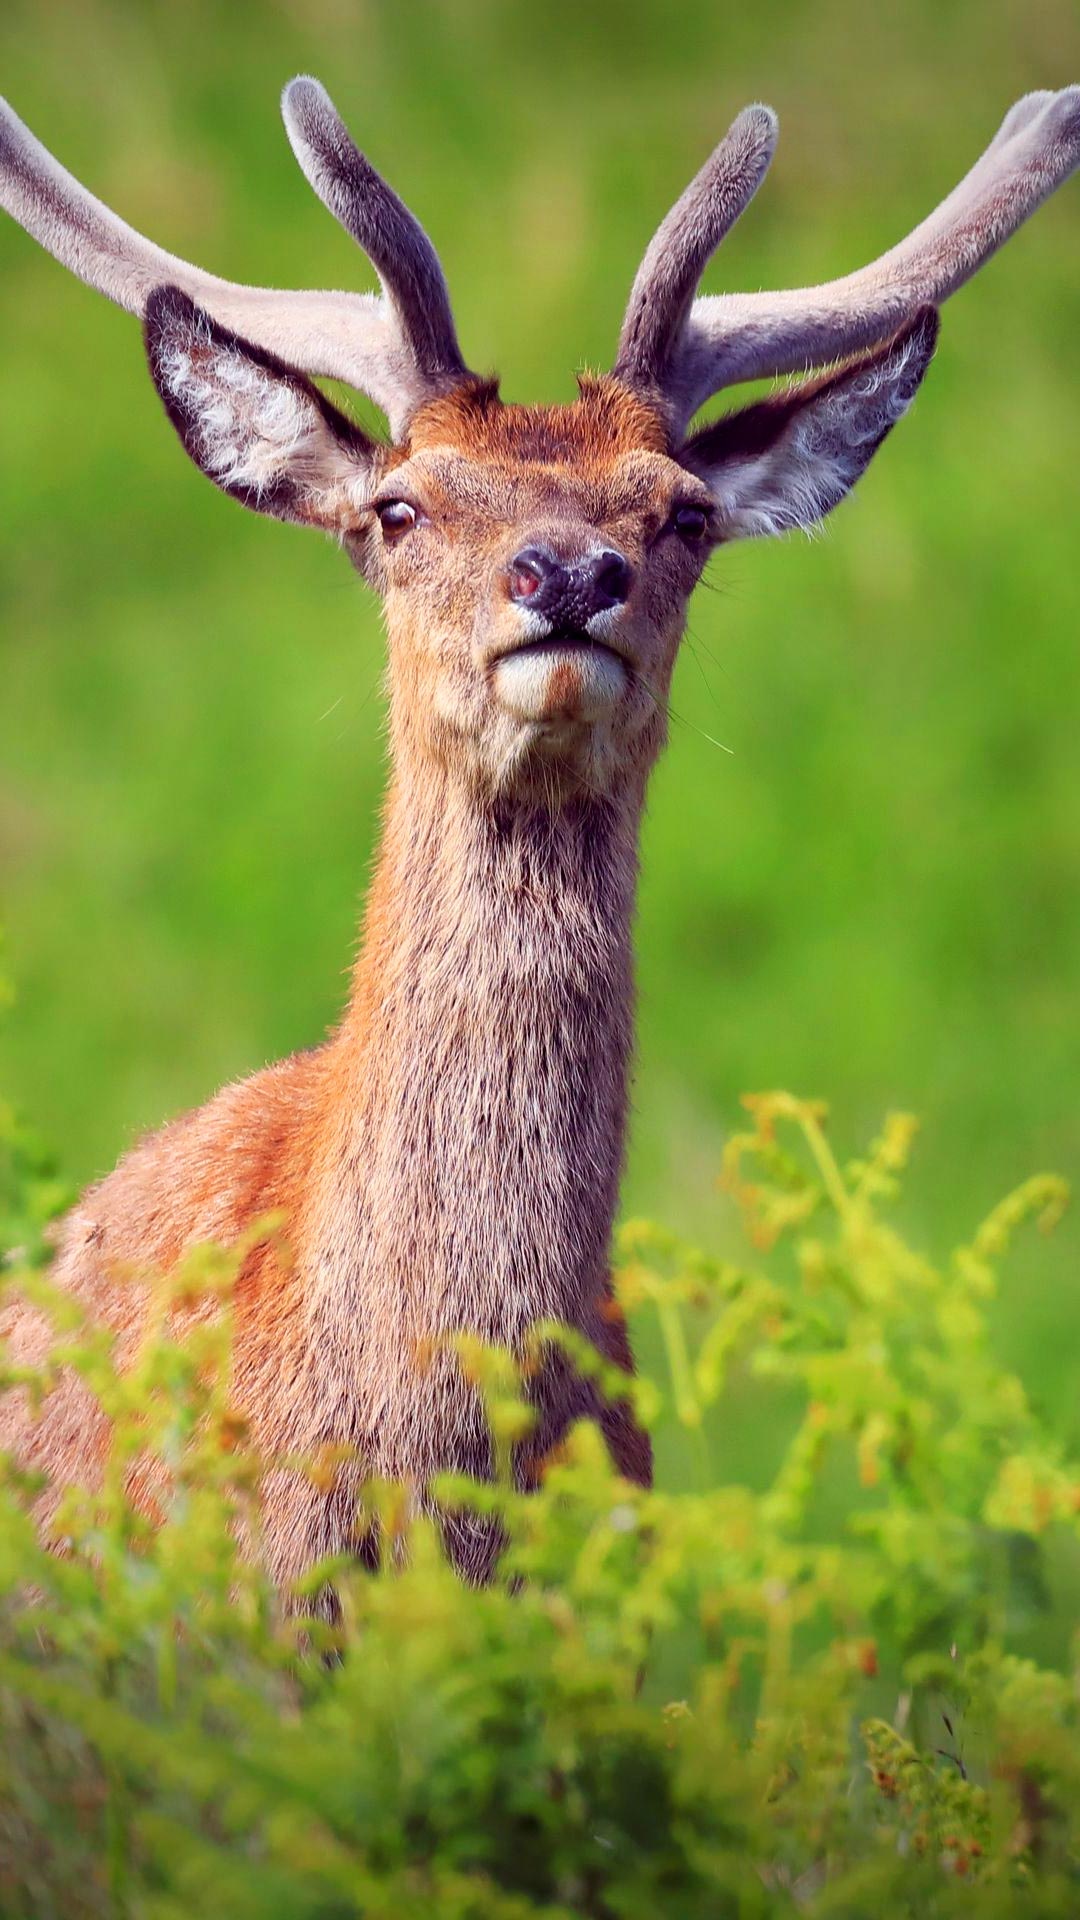 Deer wallpapers, High quality backgrounds, HD 4K, Wildlife, 1080x1920 Full HD Handy